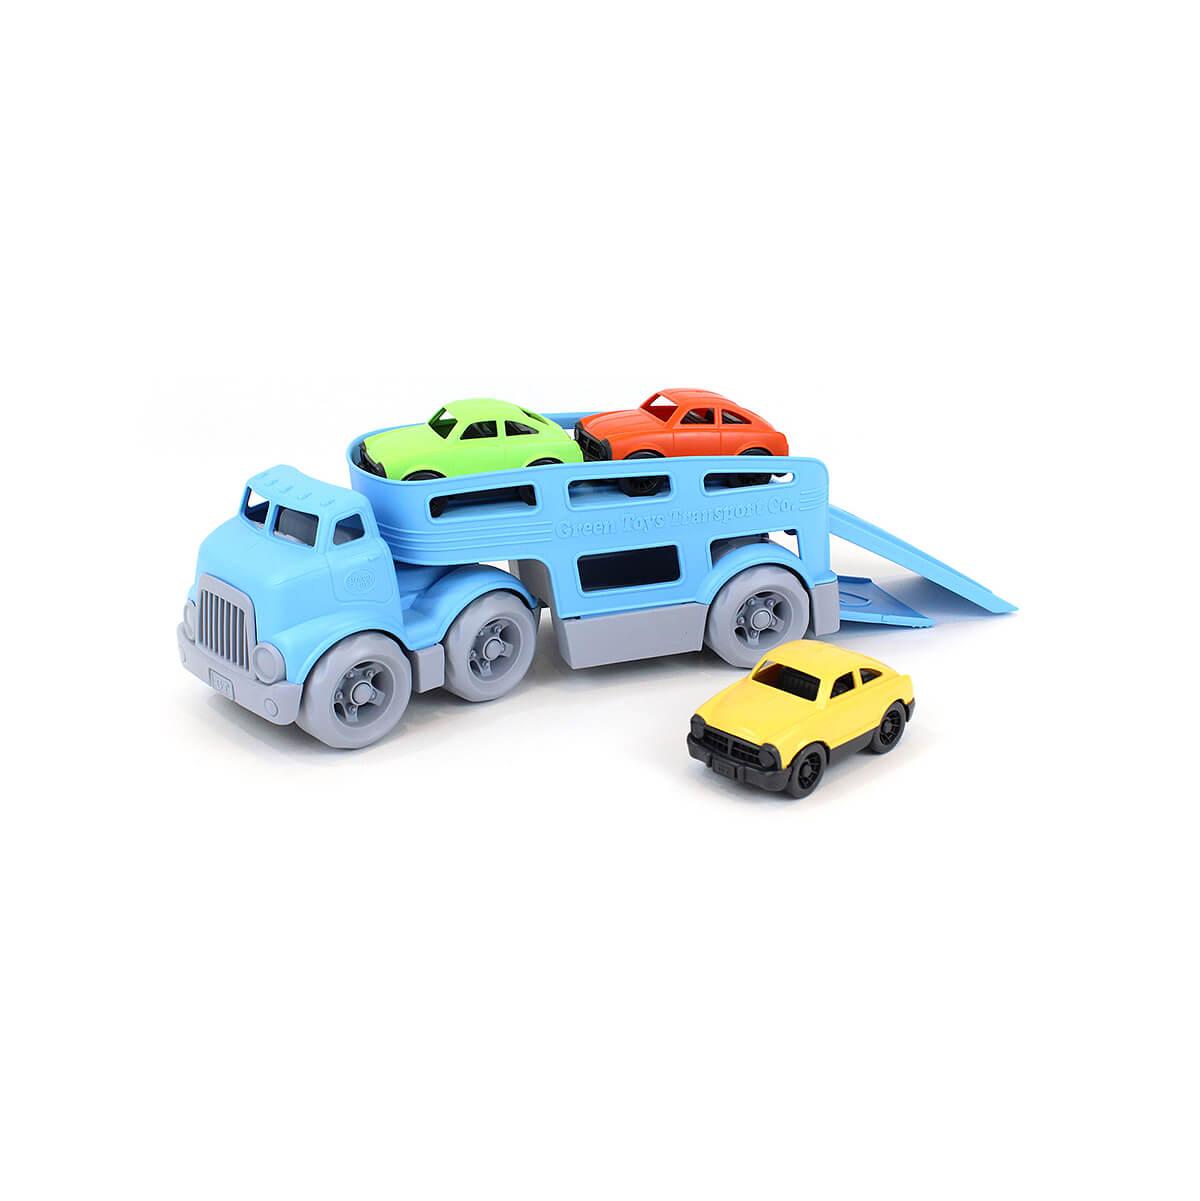  Recycled Plastic Car Carrier Toy